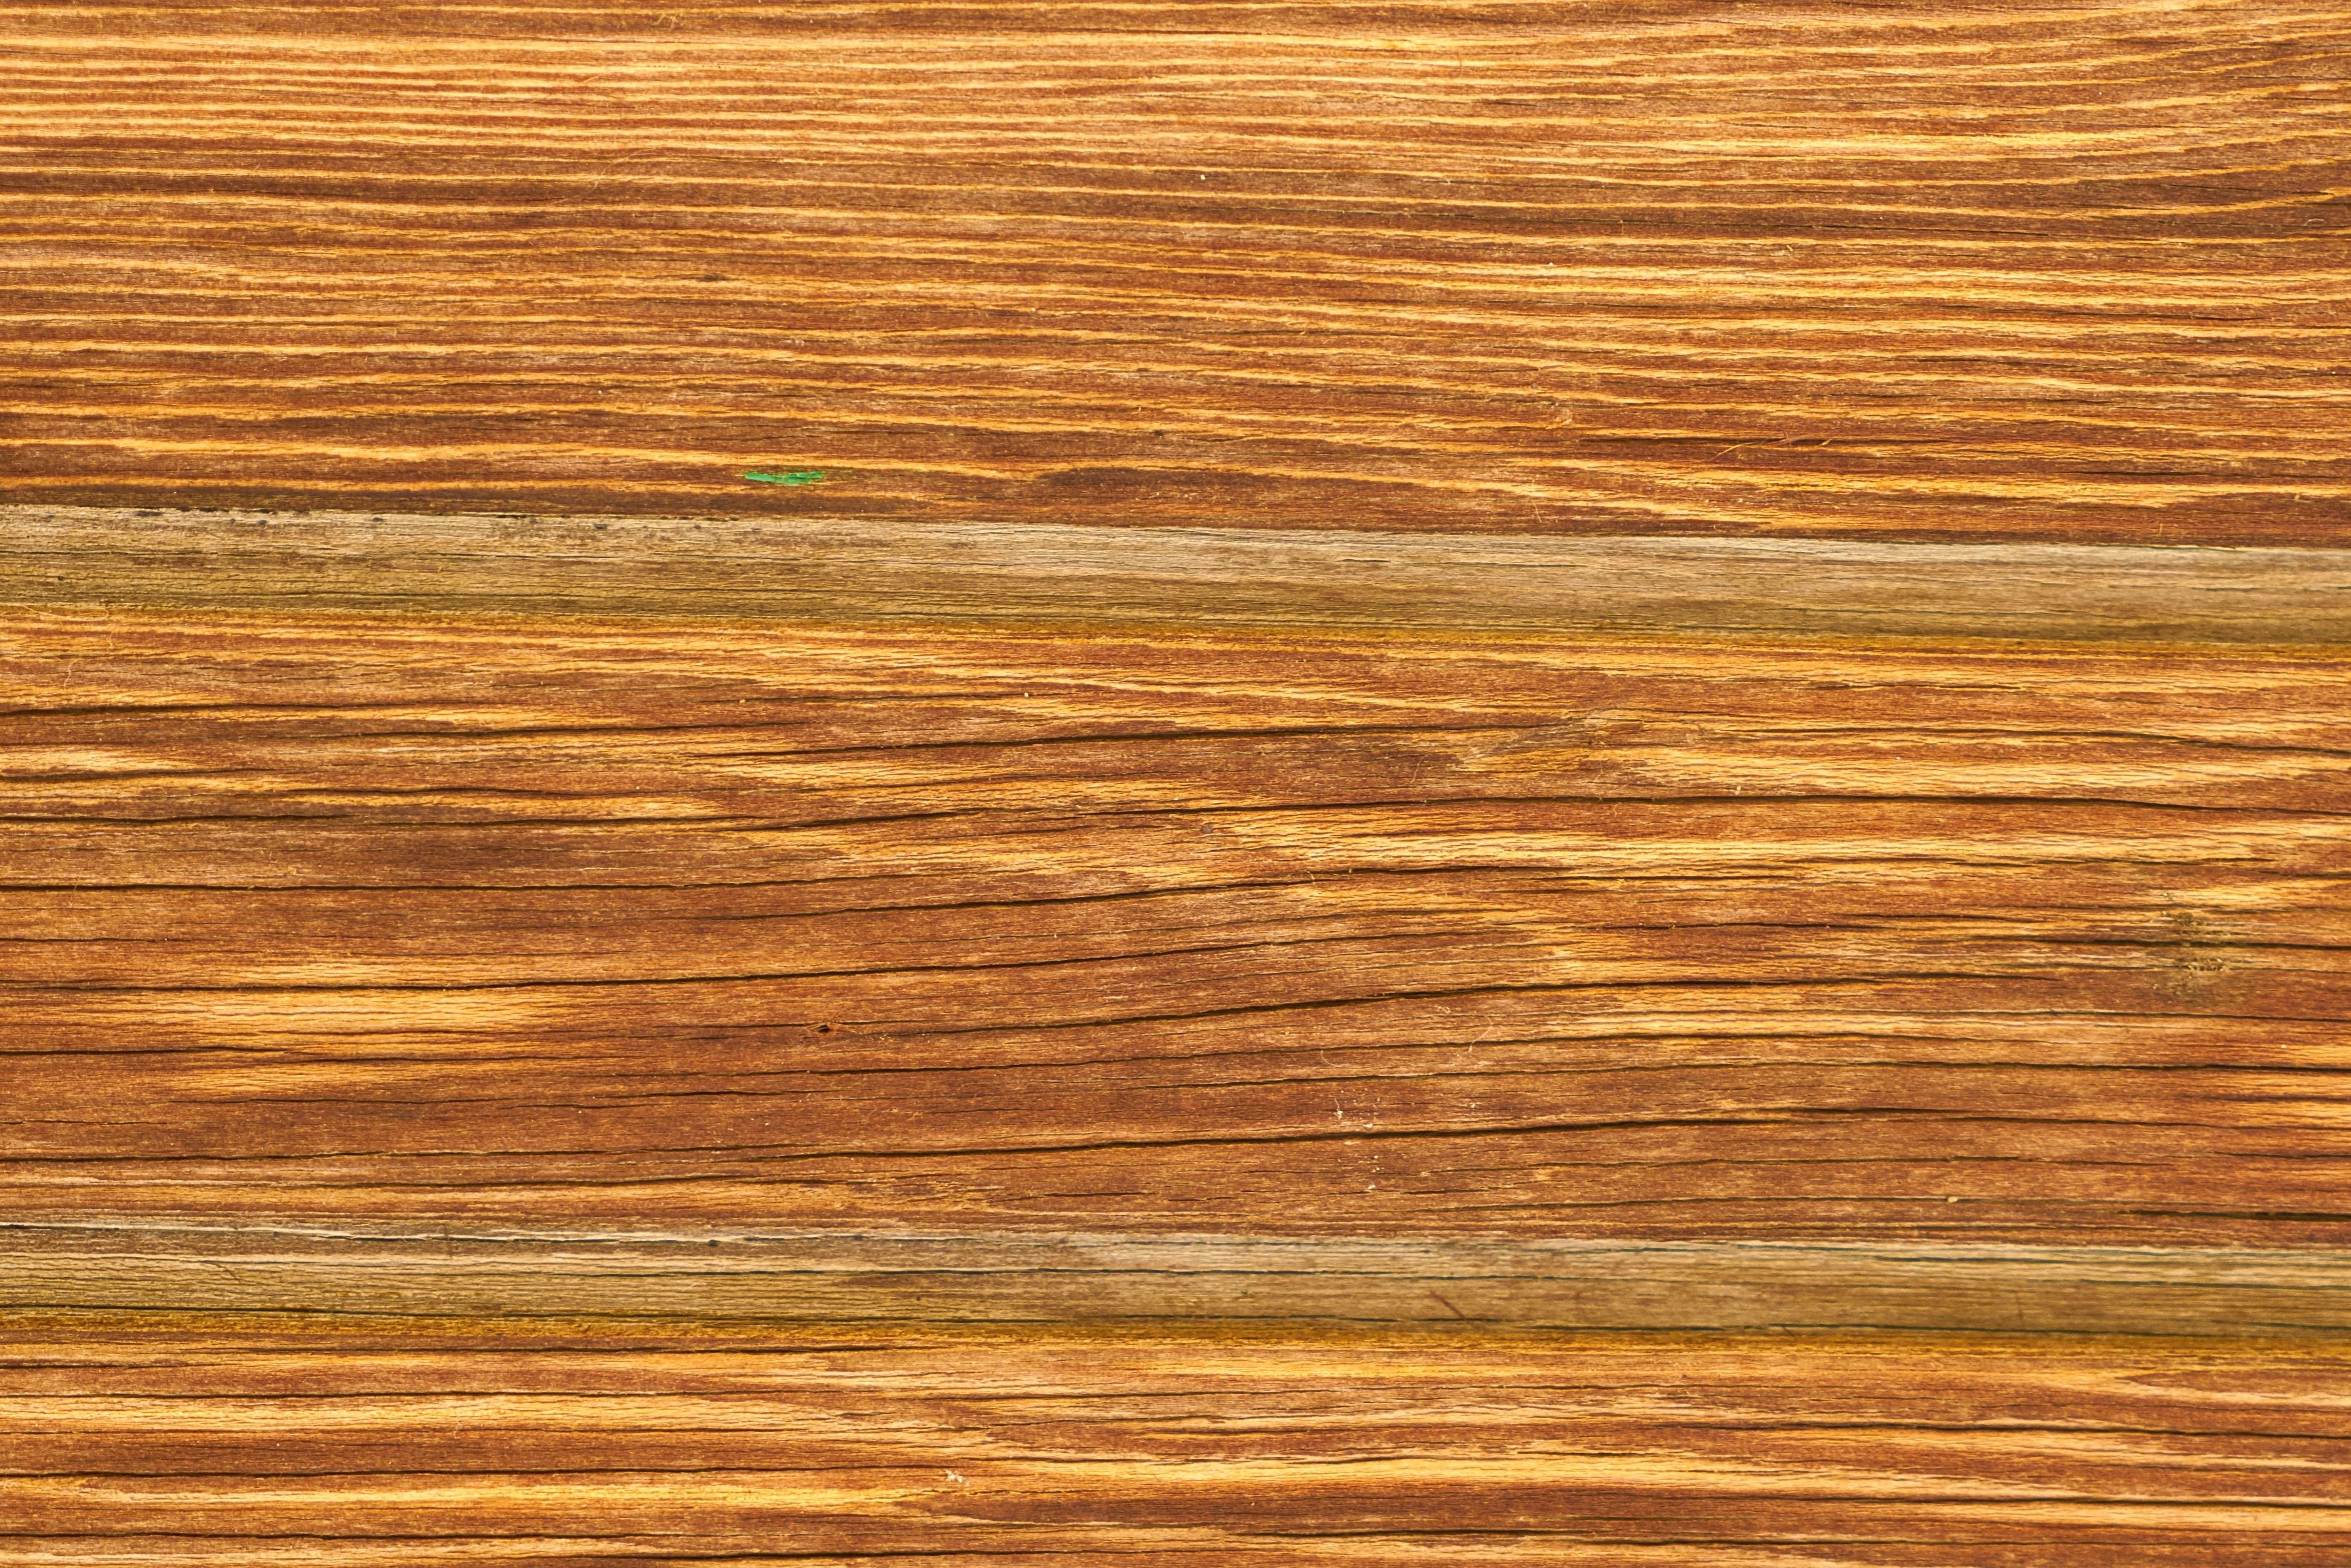 Free picture: surface, wood, texture, wooden, brown, detail